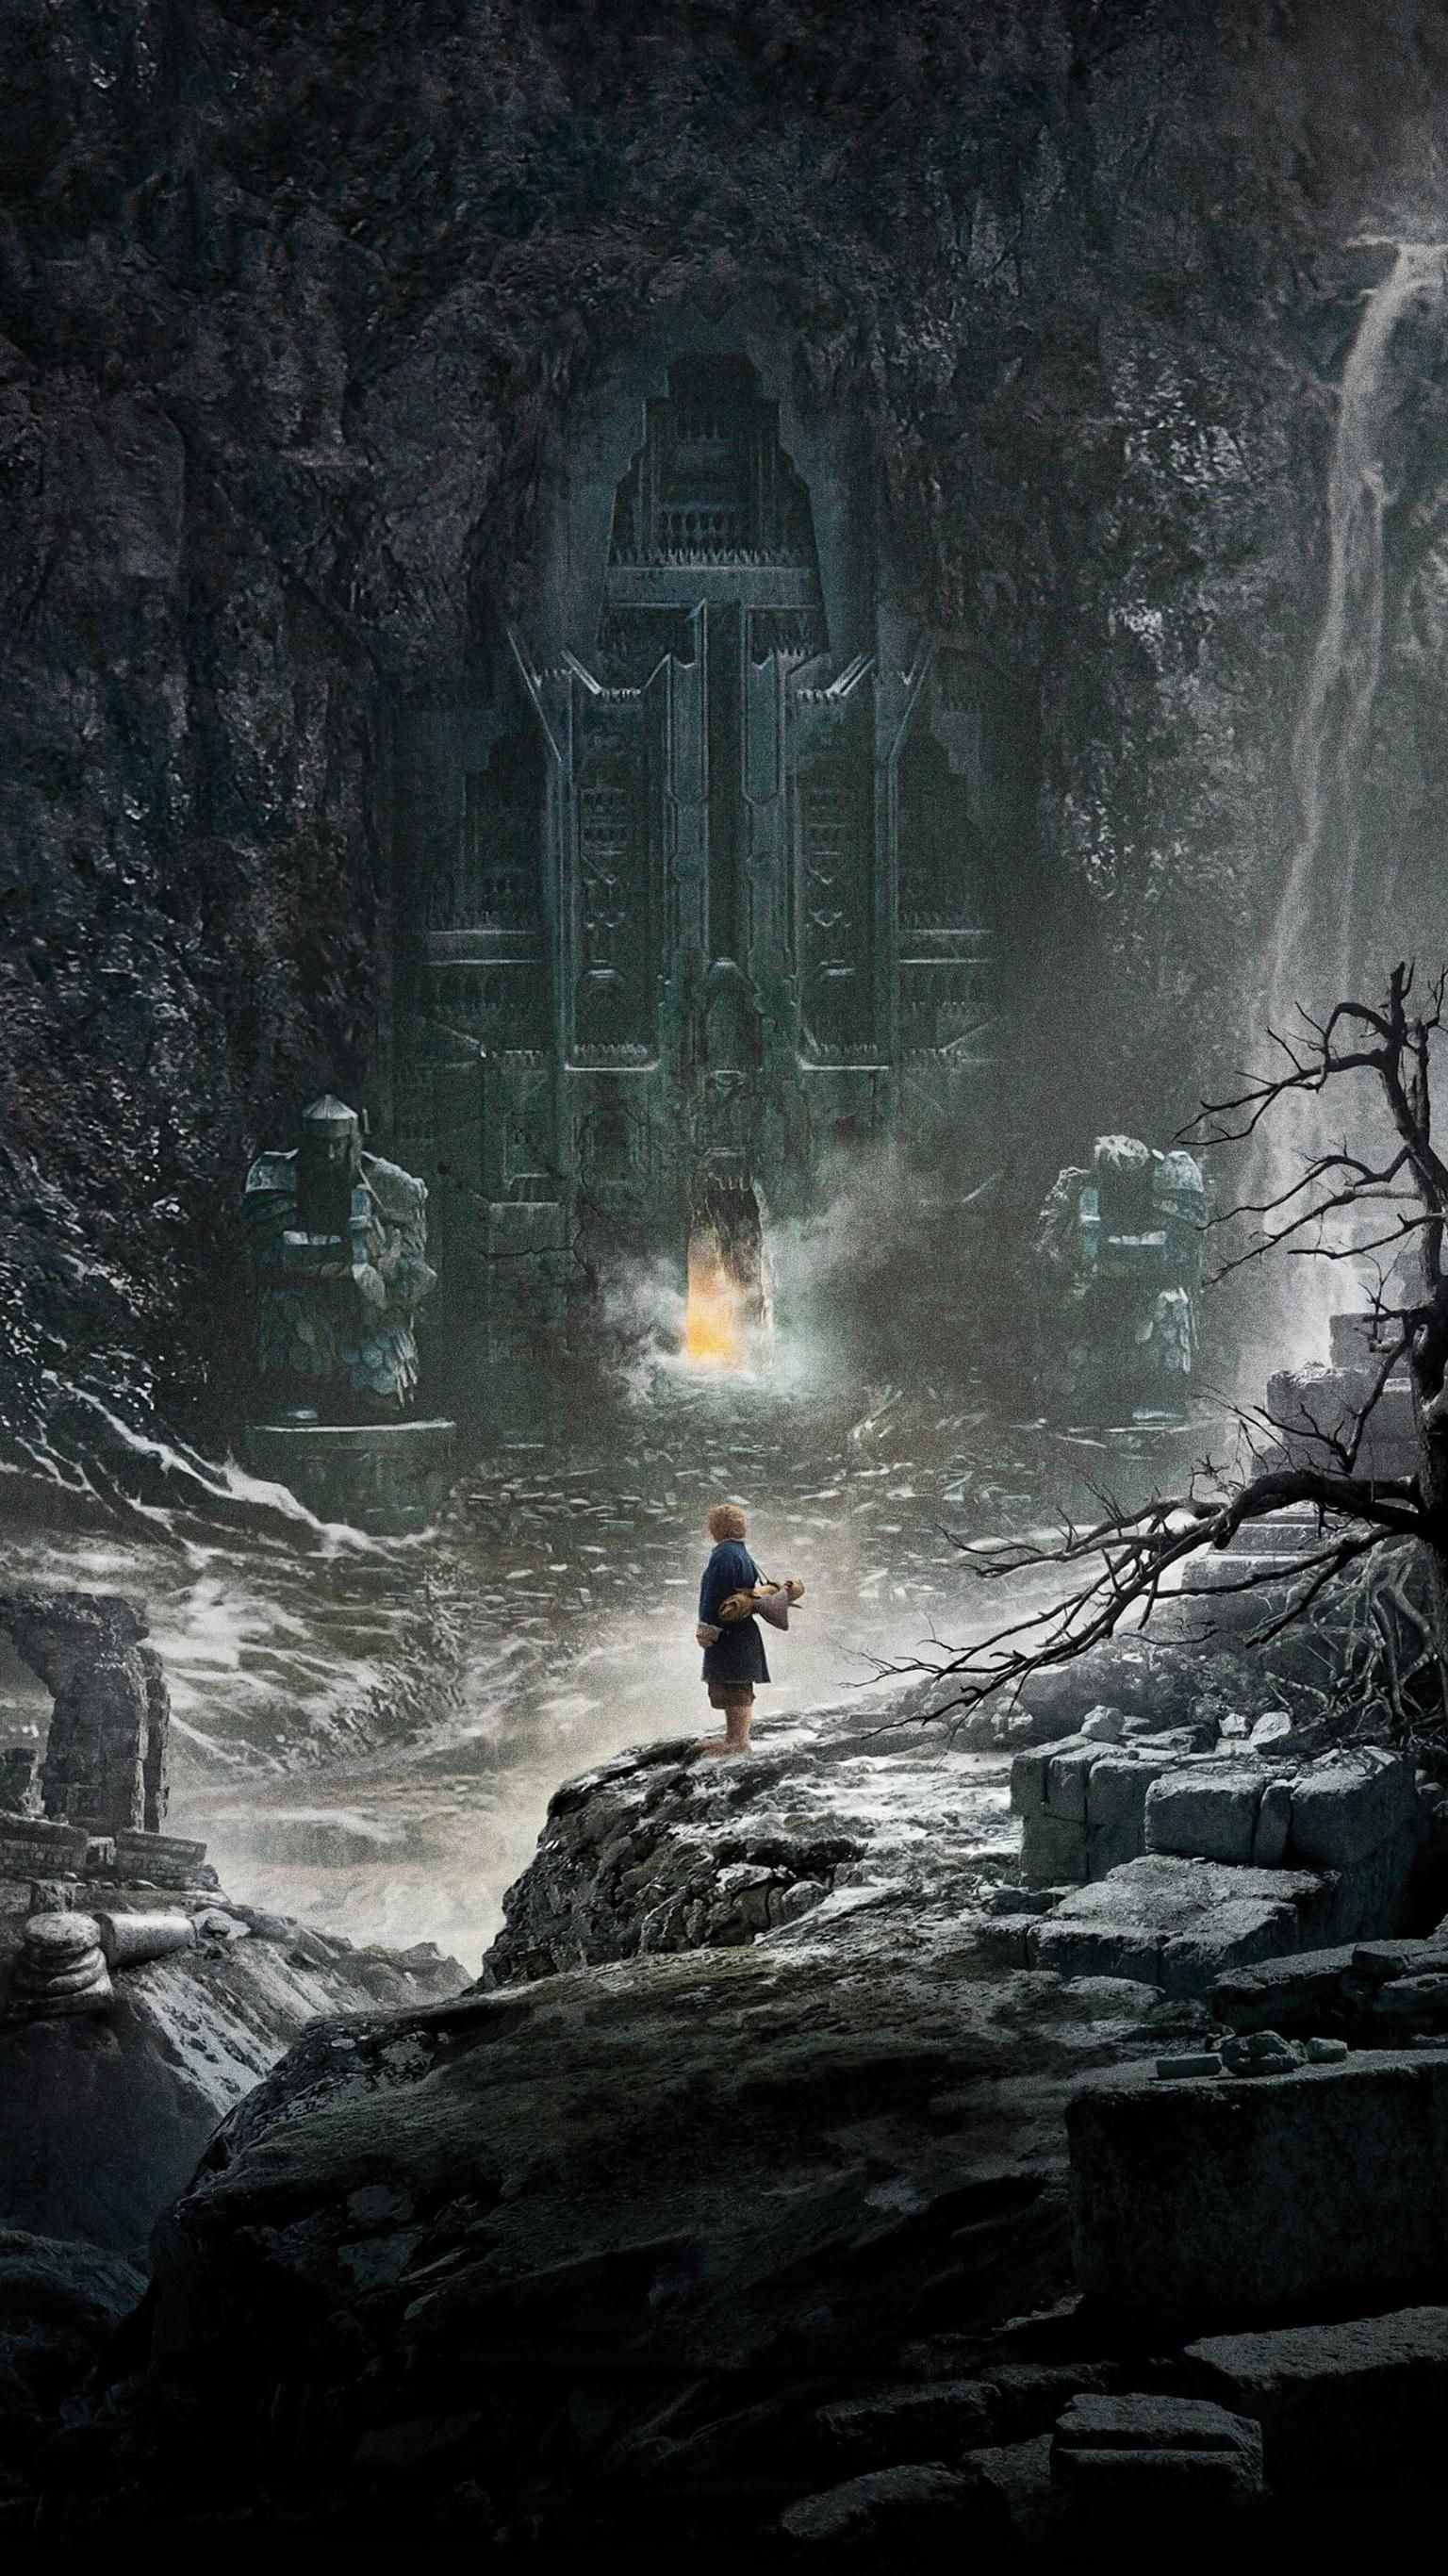 The Hobbit Desolation Of Smaug Phone Wallpaper In